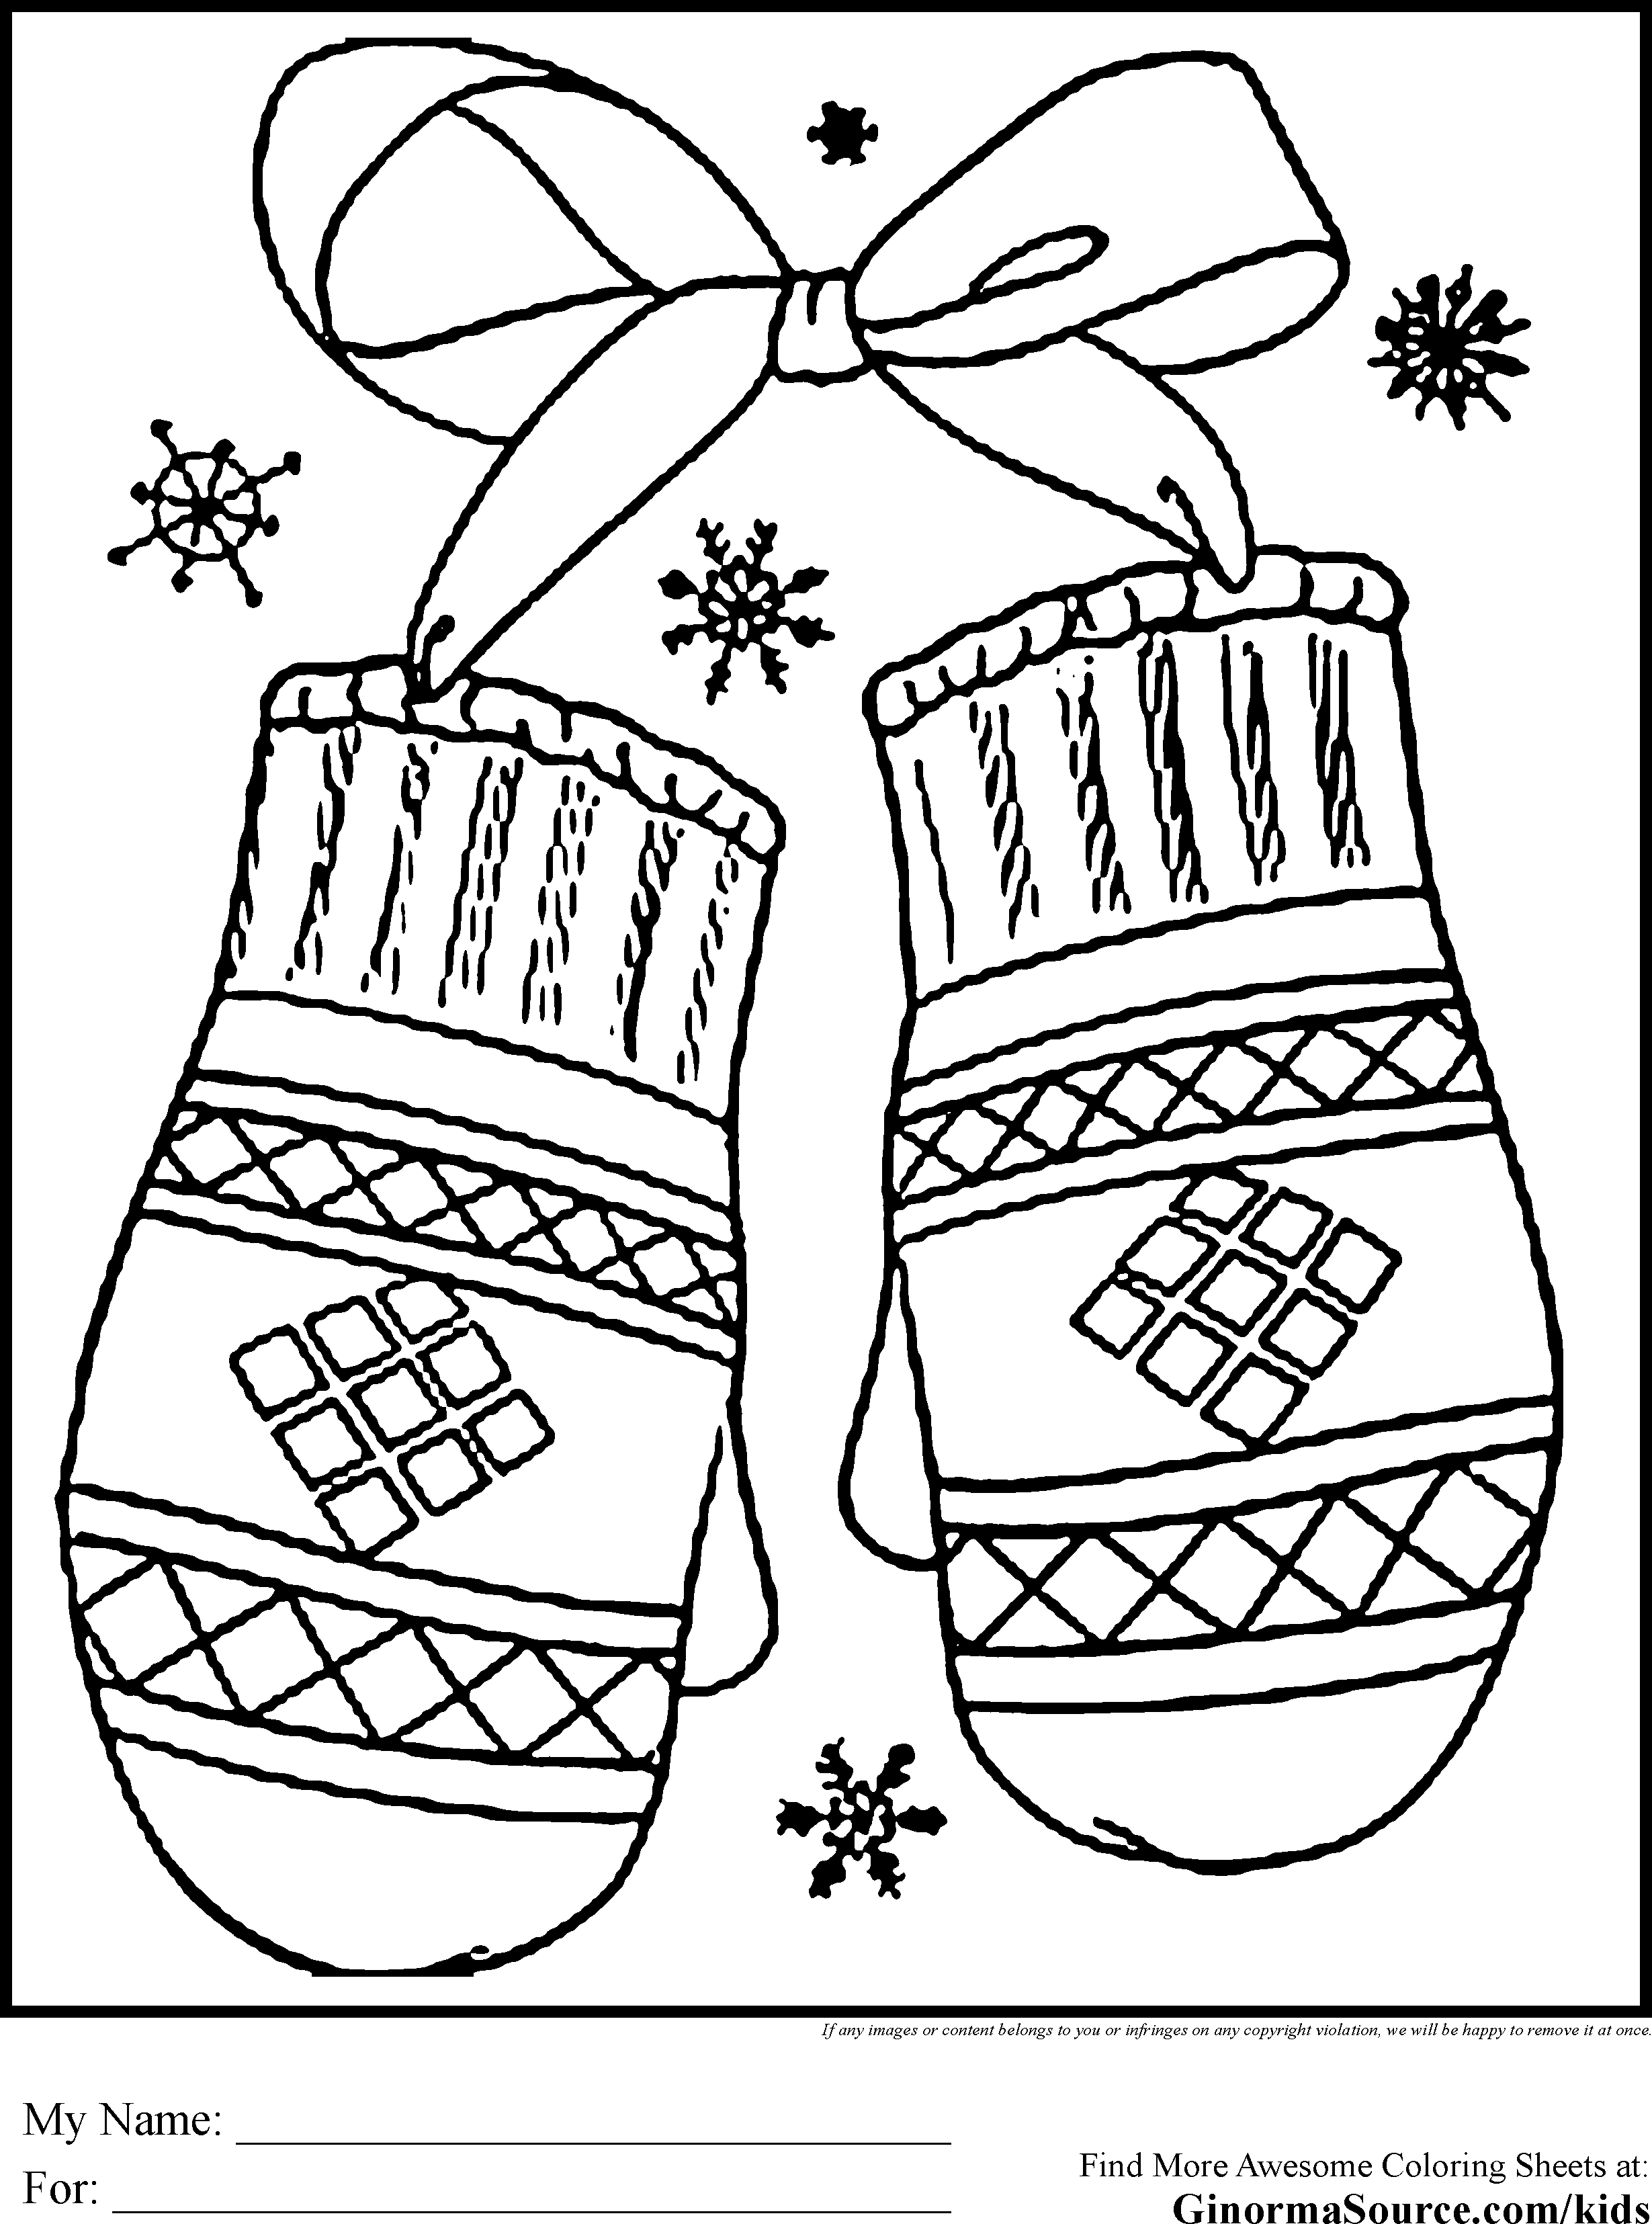 winter-season-coloring-pages-crafts-and-worksheets-for-preschool